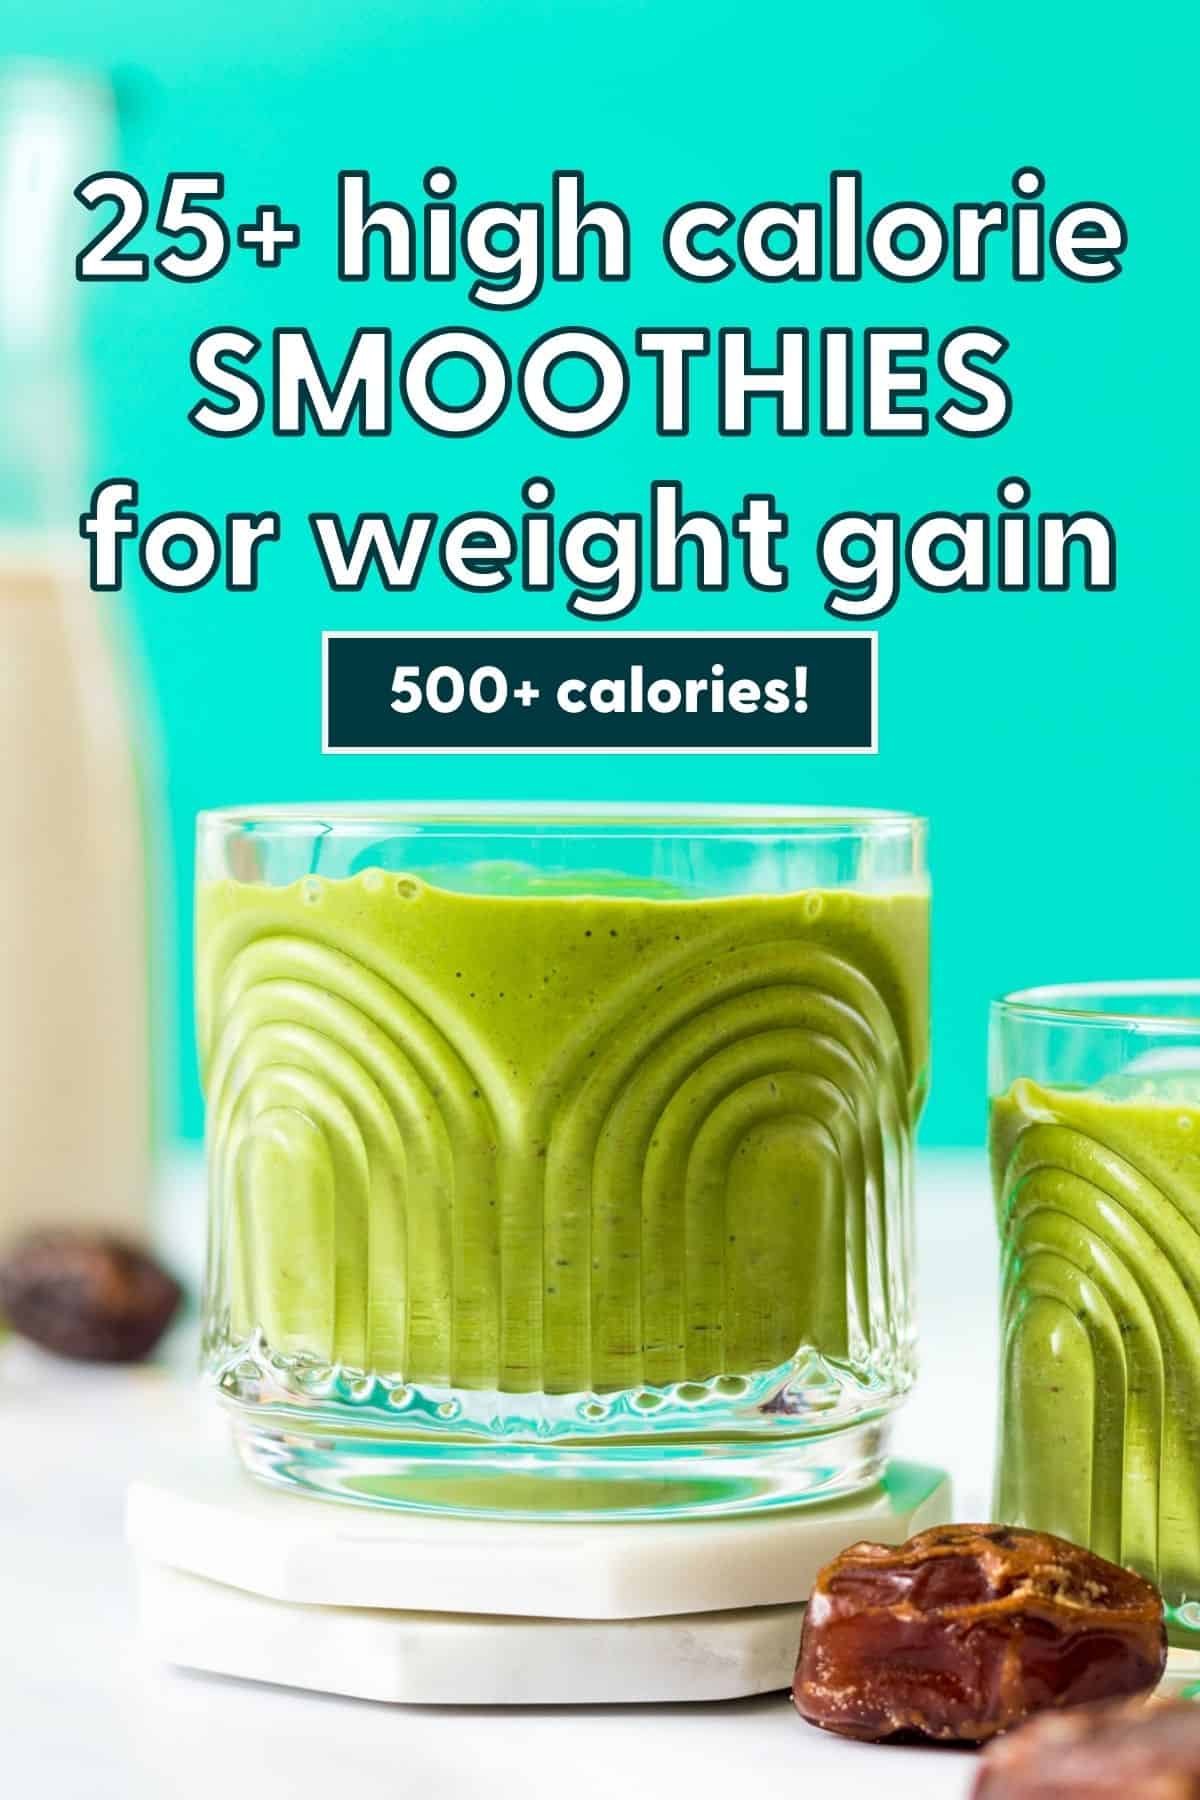 Smoothies for weight gain.